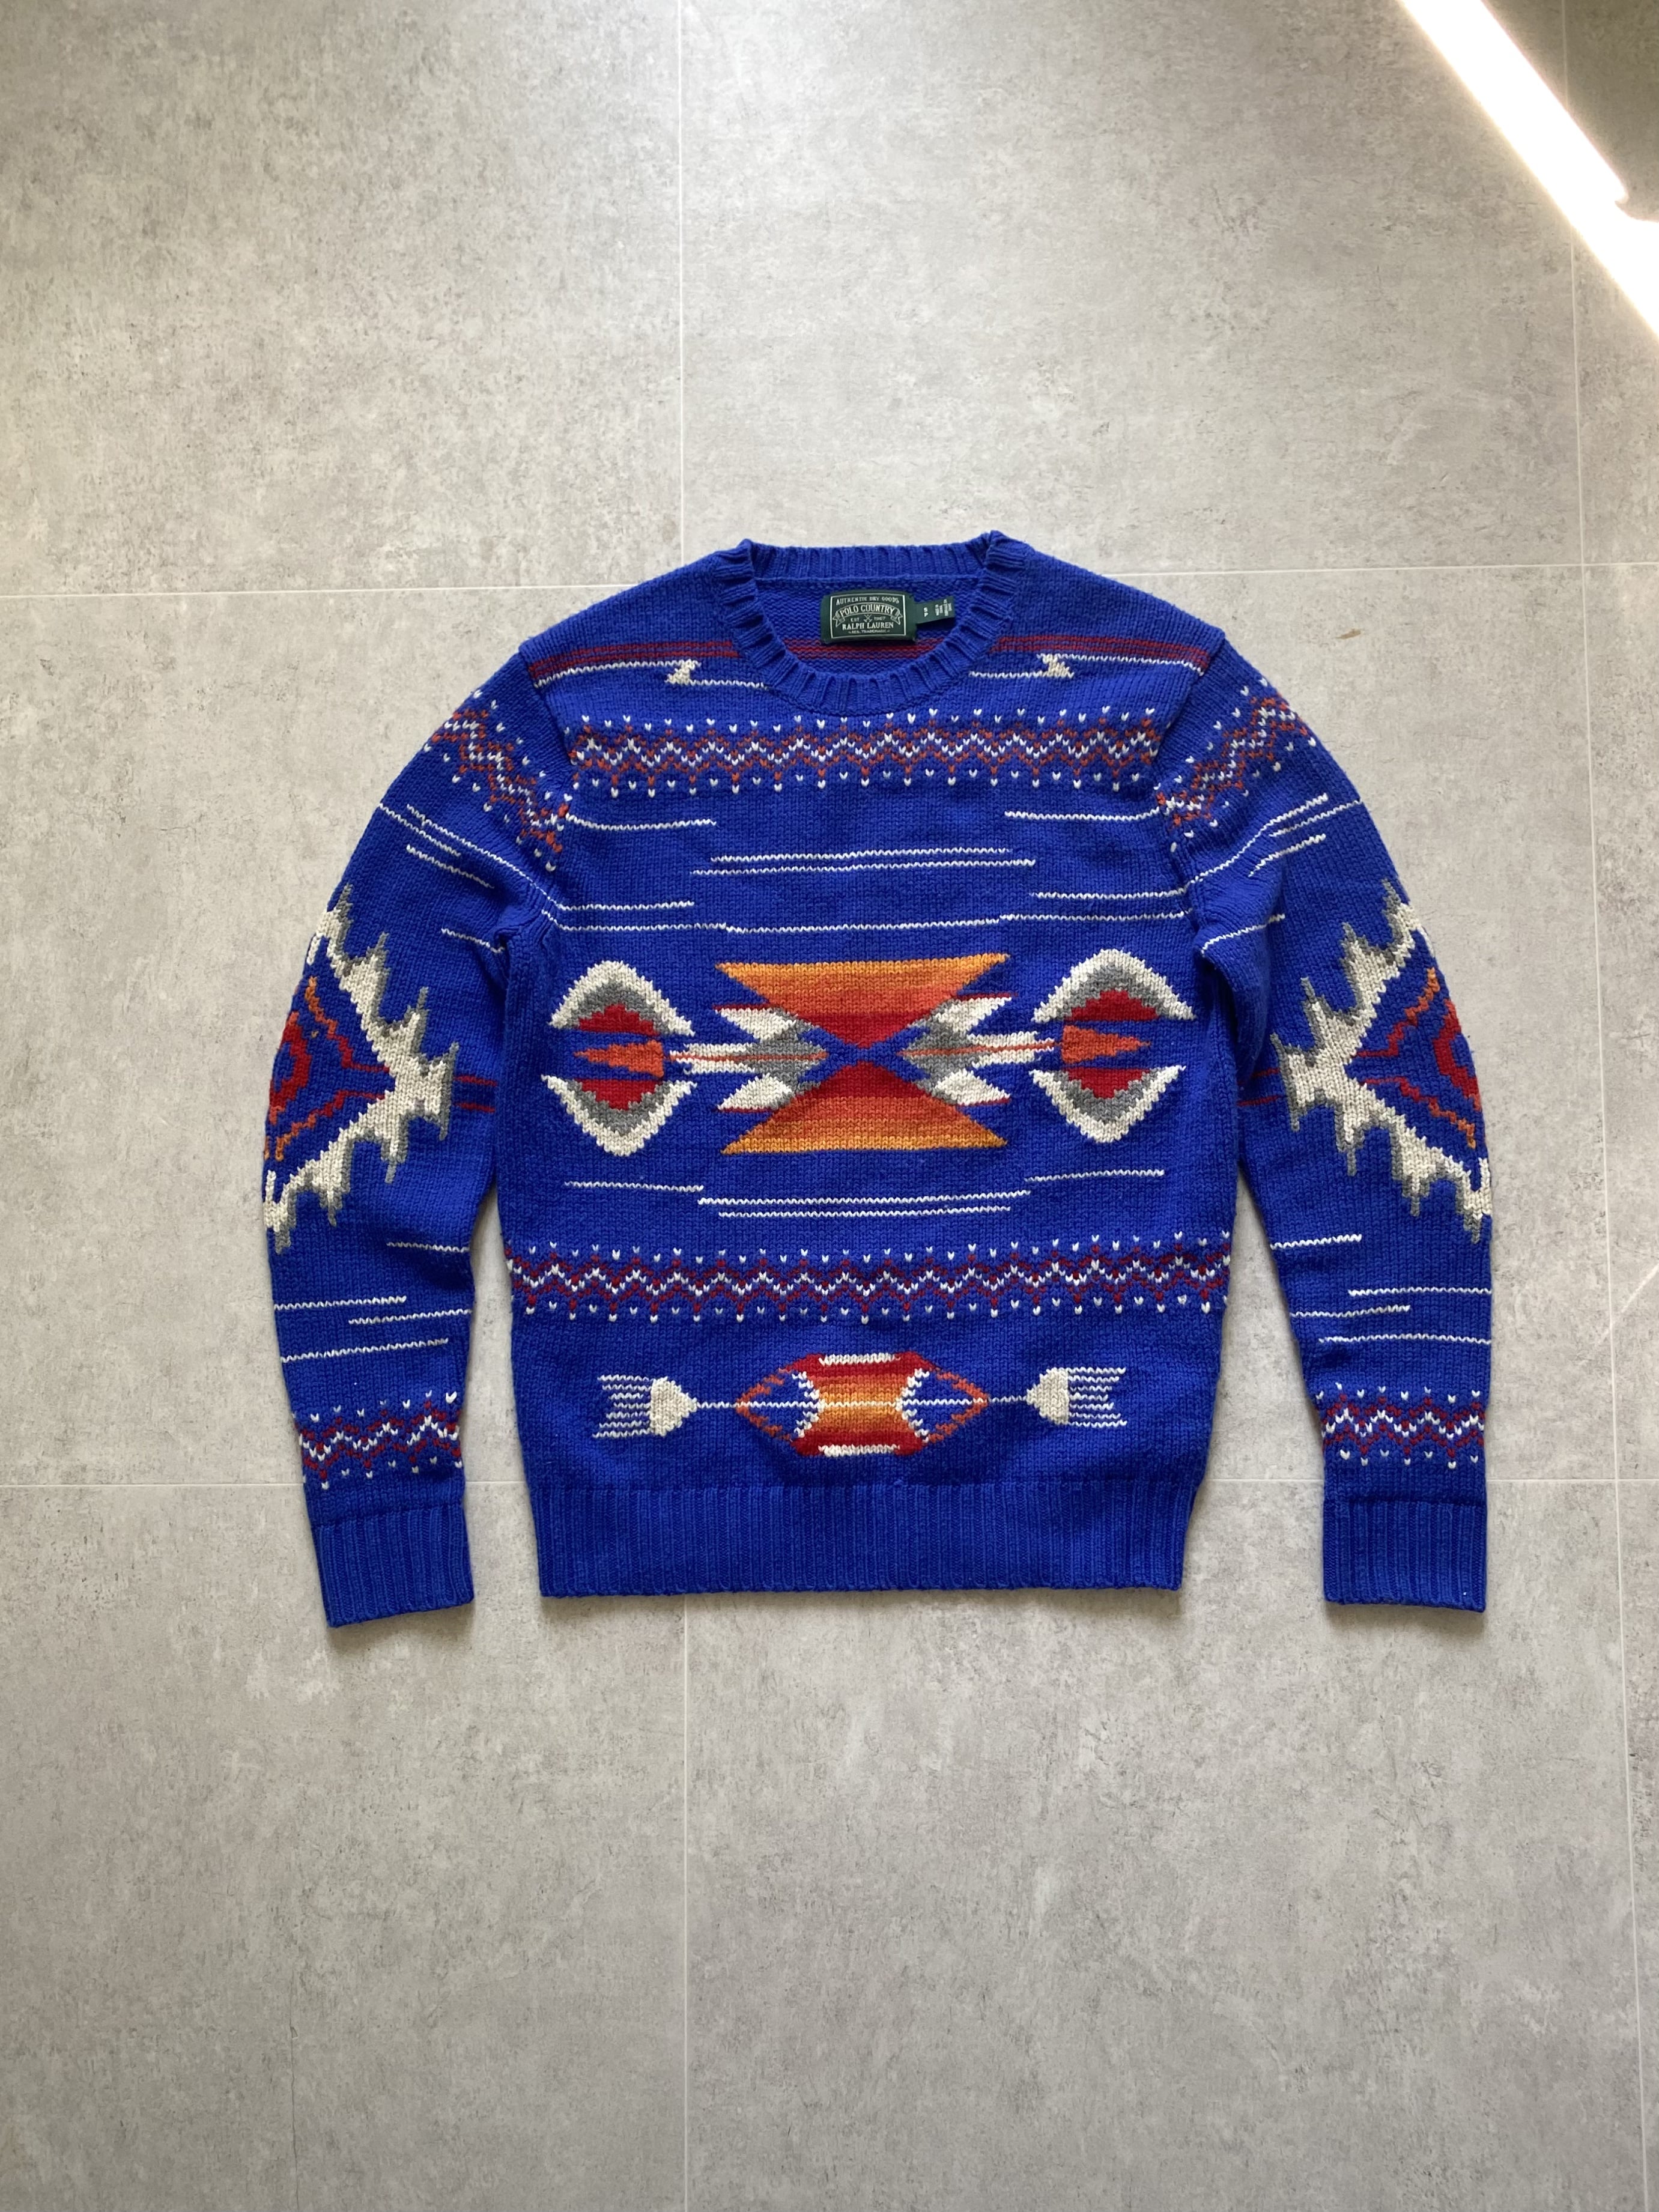 Polo Ralph Lauren Country Navajo Pattern Knit Sweater S(95/100 or ~66 Size) - 체리피커